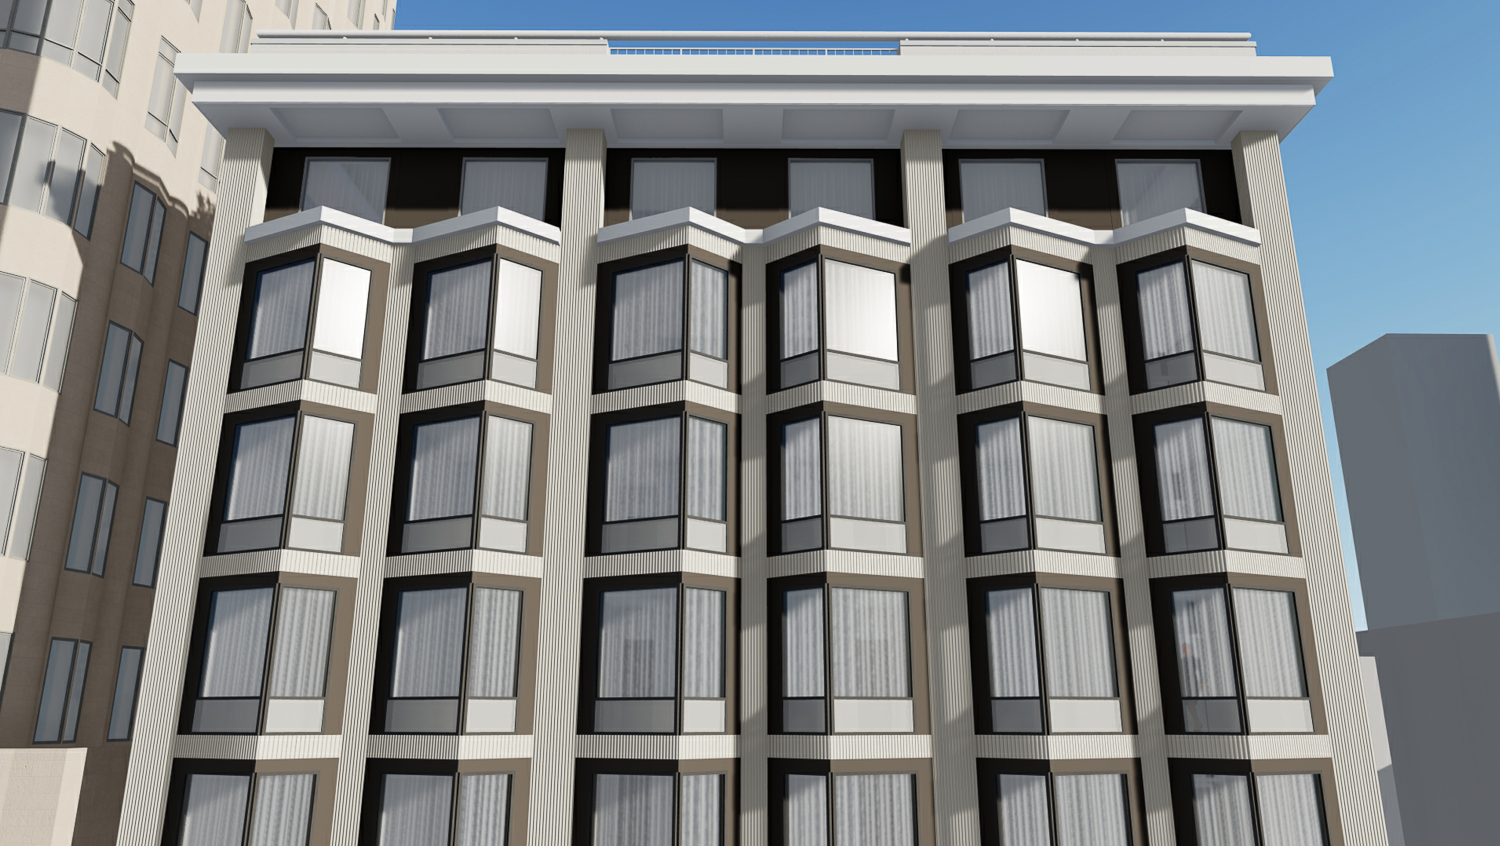 420 Sutter Street cornice, rendering by Stanton Architecture